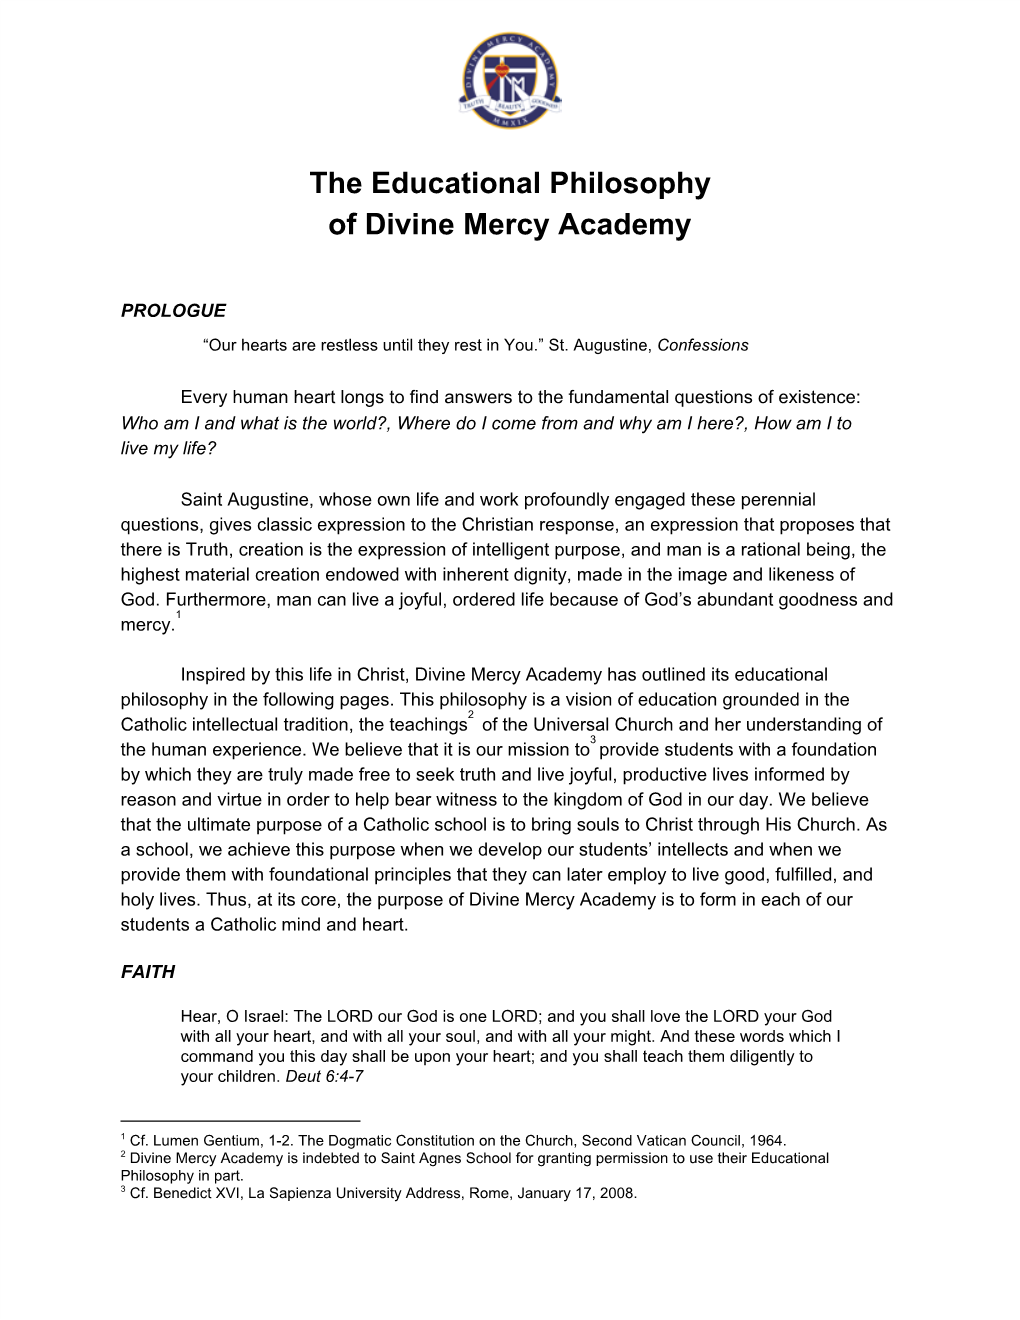 The Educational Philosophy of Divine Mercy Academy